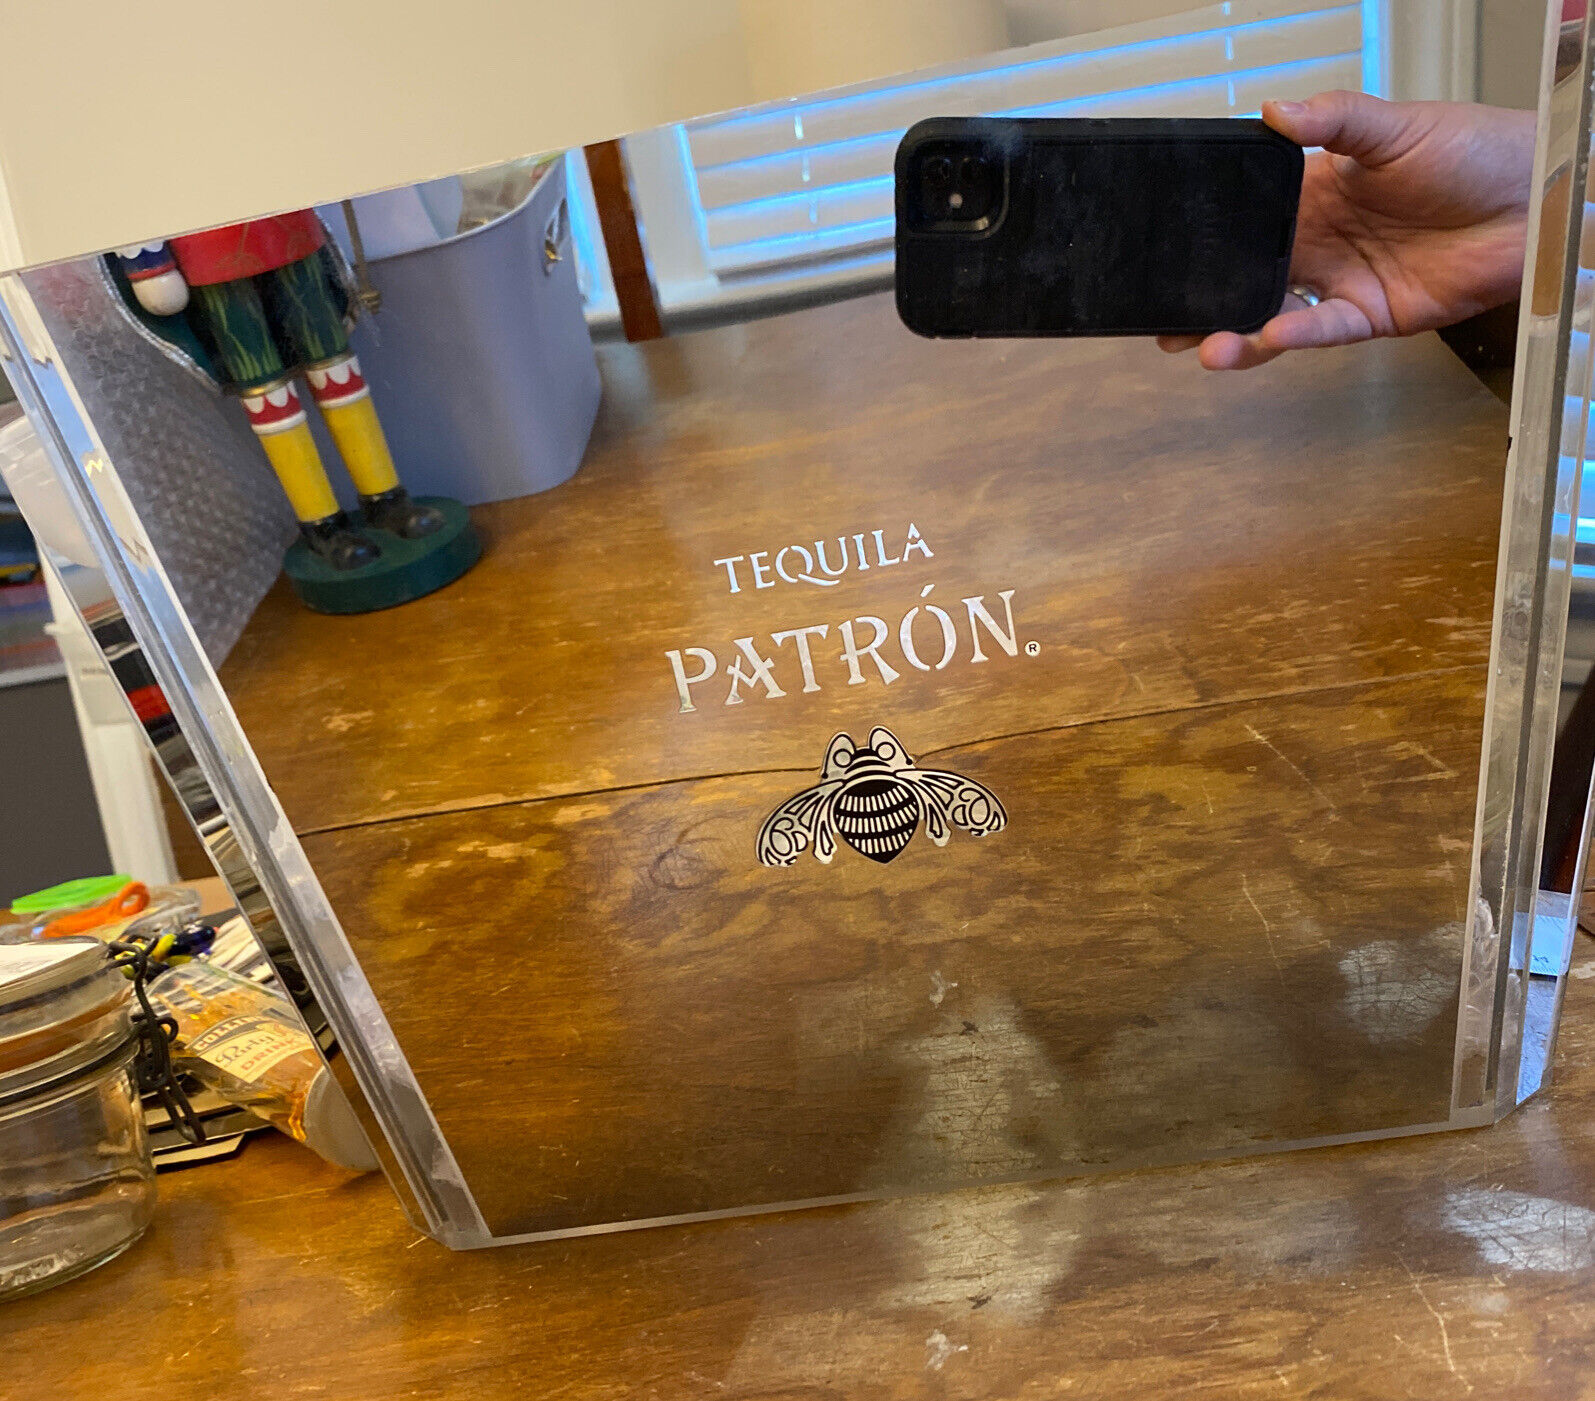 Patron Tequila Mirrored Acrylic Ice Bucket Cooler Etched Logo 16x11x9.75 Large